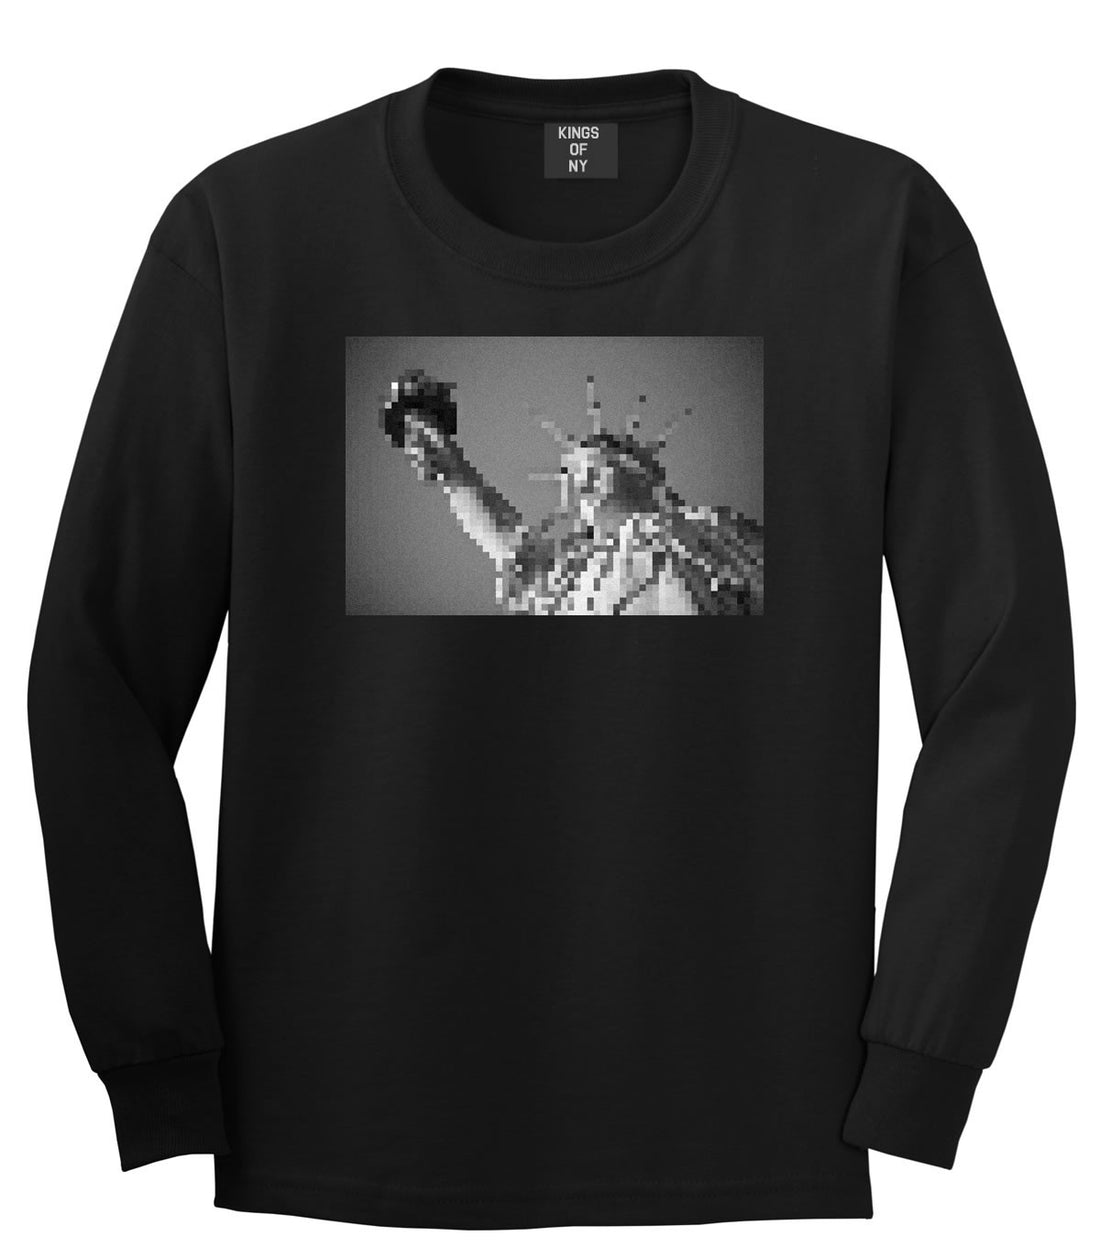 Statue Of Liberty Pixelated Long Sleeve T-Shirt in Black by Kings Of NY